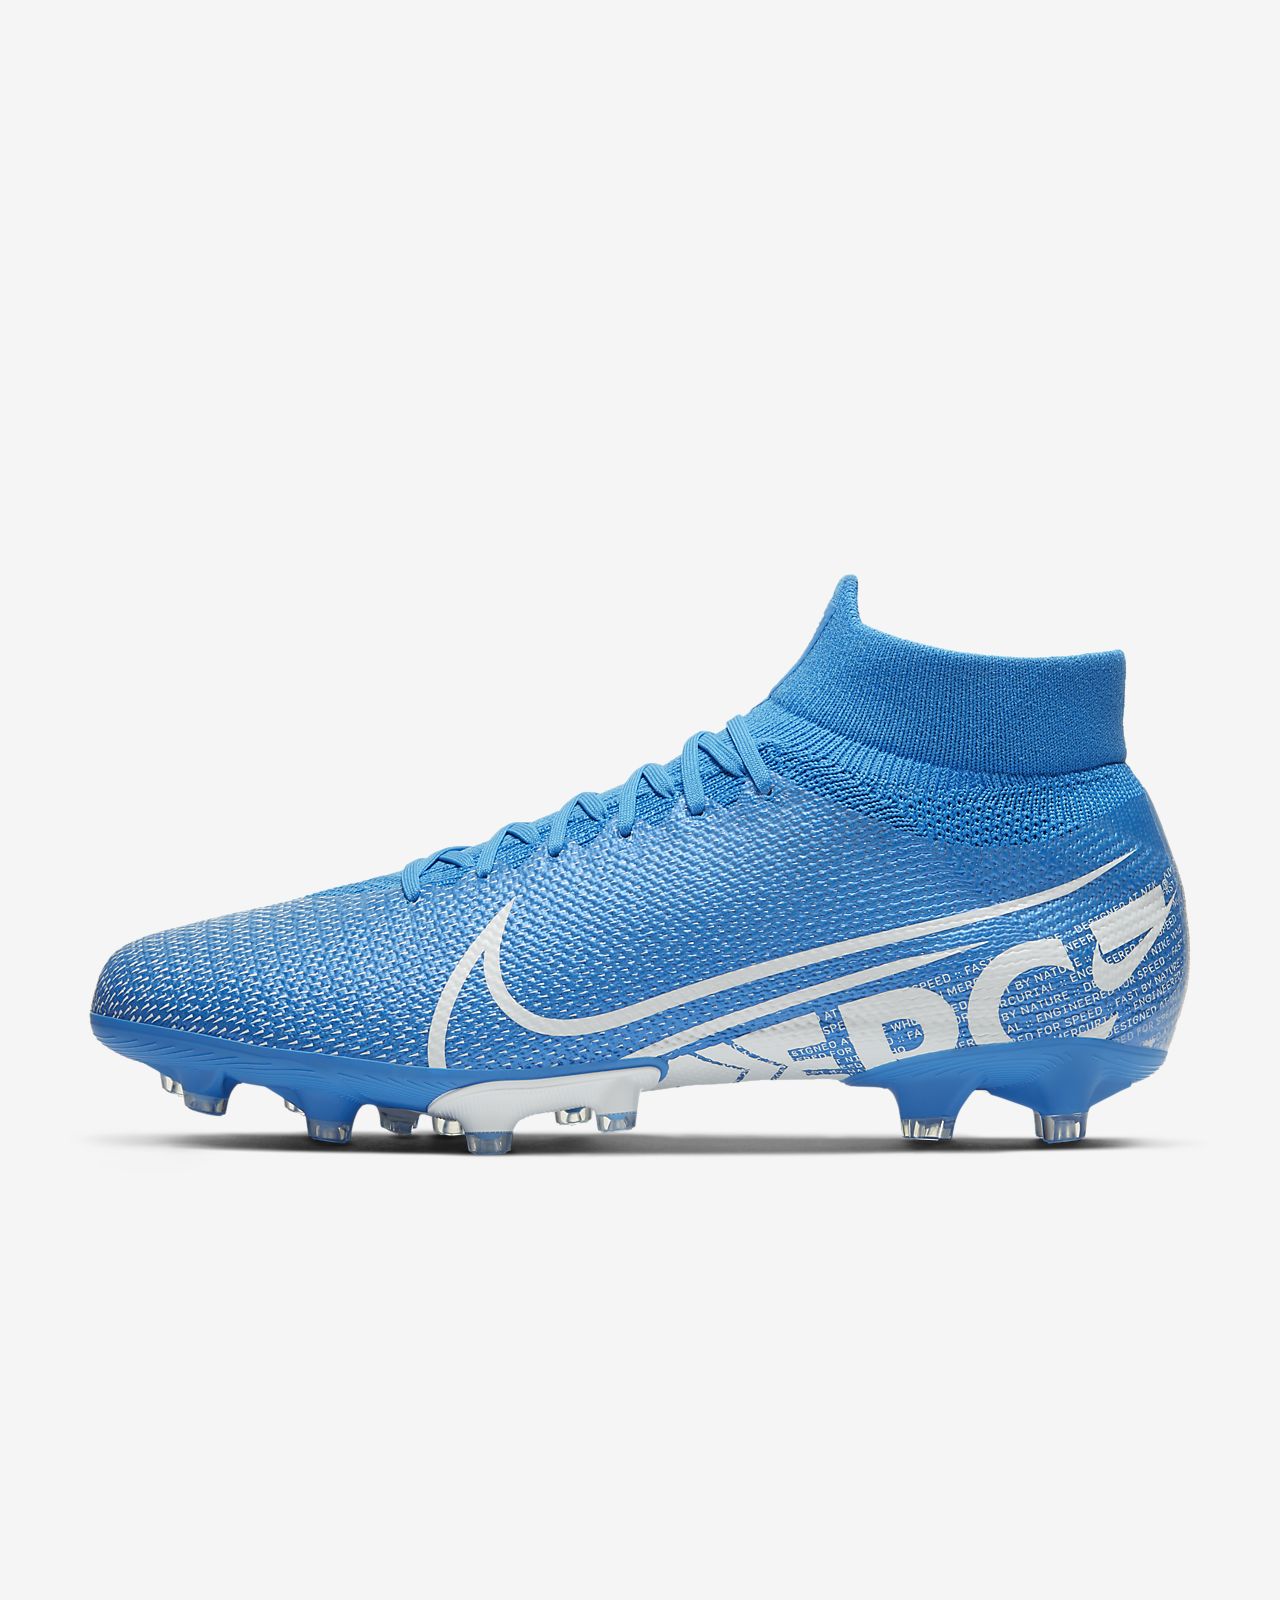 Football Boots Nike Mercurial Superfly VII Pro MDS 2 FG.